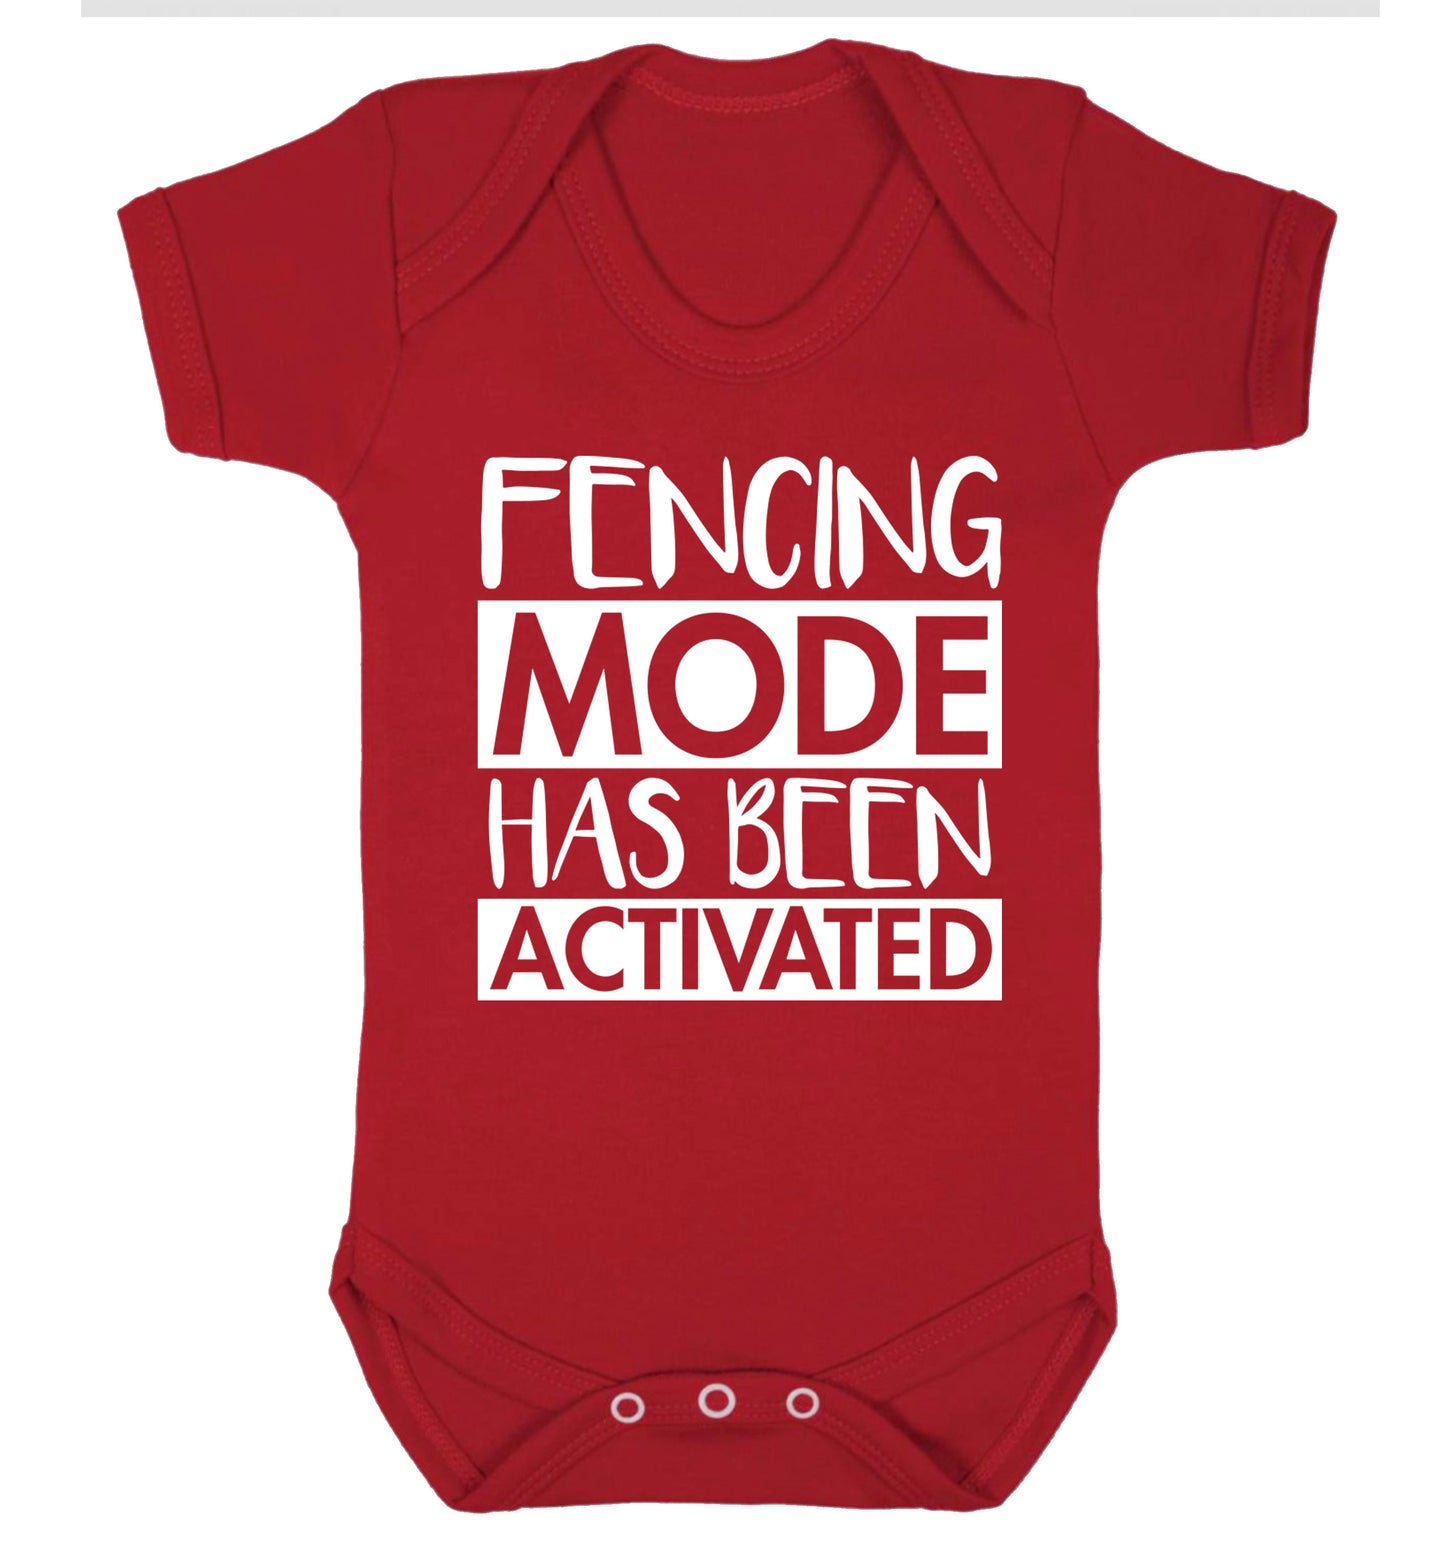 Fencing mode activated Baby Vest red 18-24 months